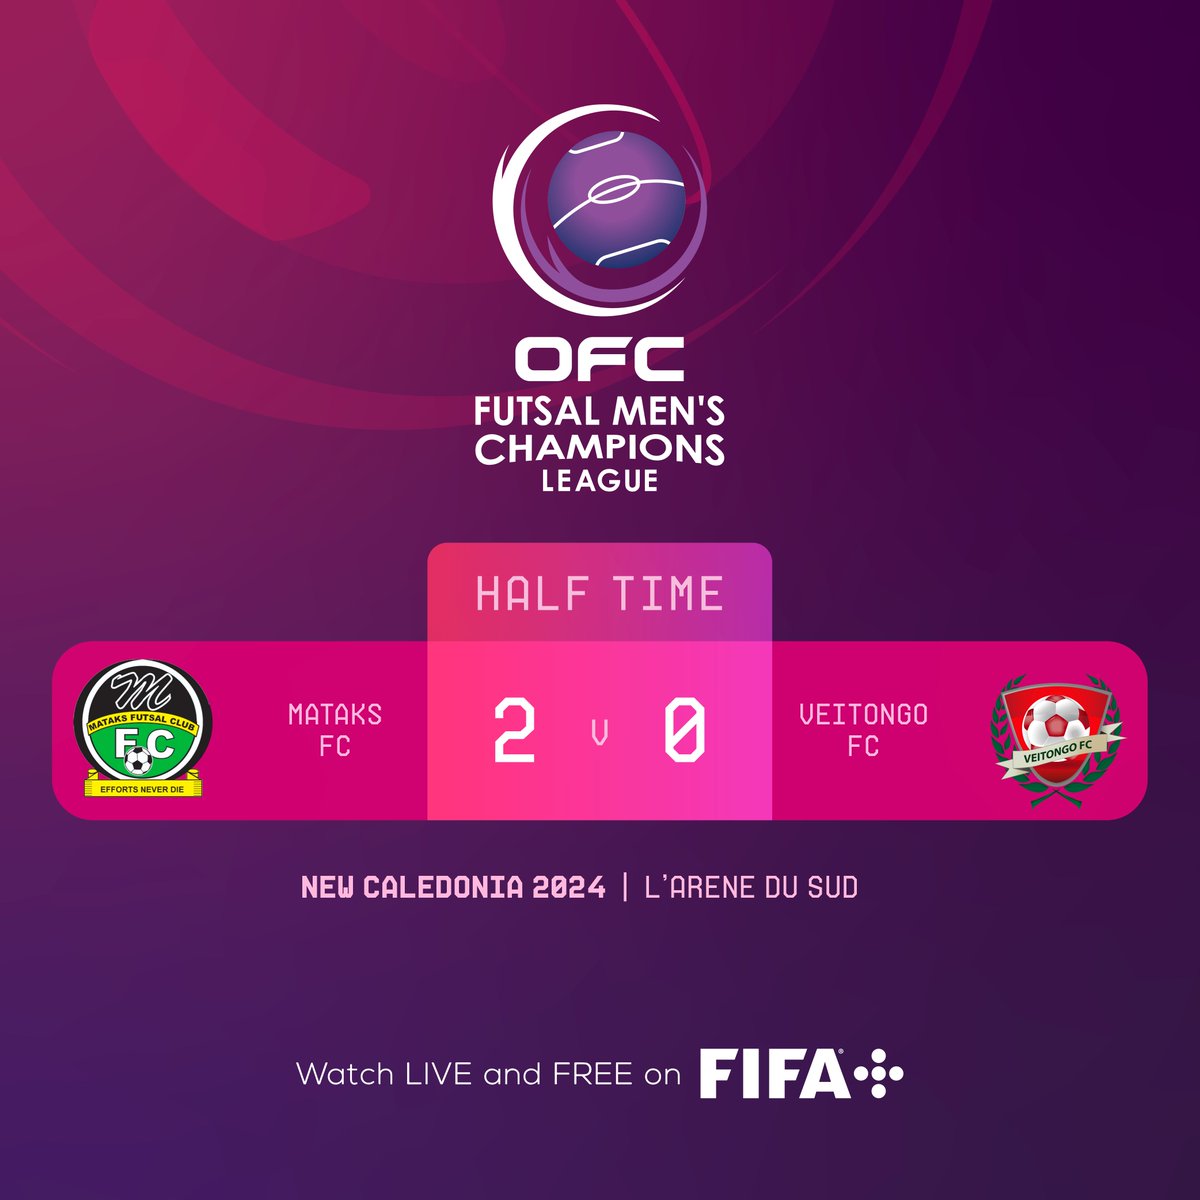 HALF TIME | After the first period it is Mataks FC who leads 2-0 against Veitongo FC.

Catch all the action LIVE and FREE on FIFA+
fifa.fans/3JAbZRh

#OFMCL